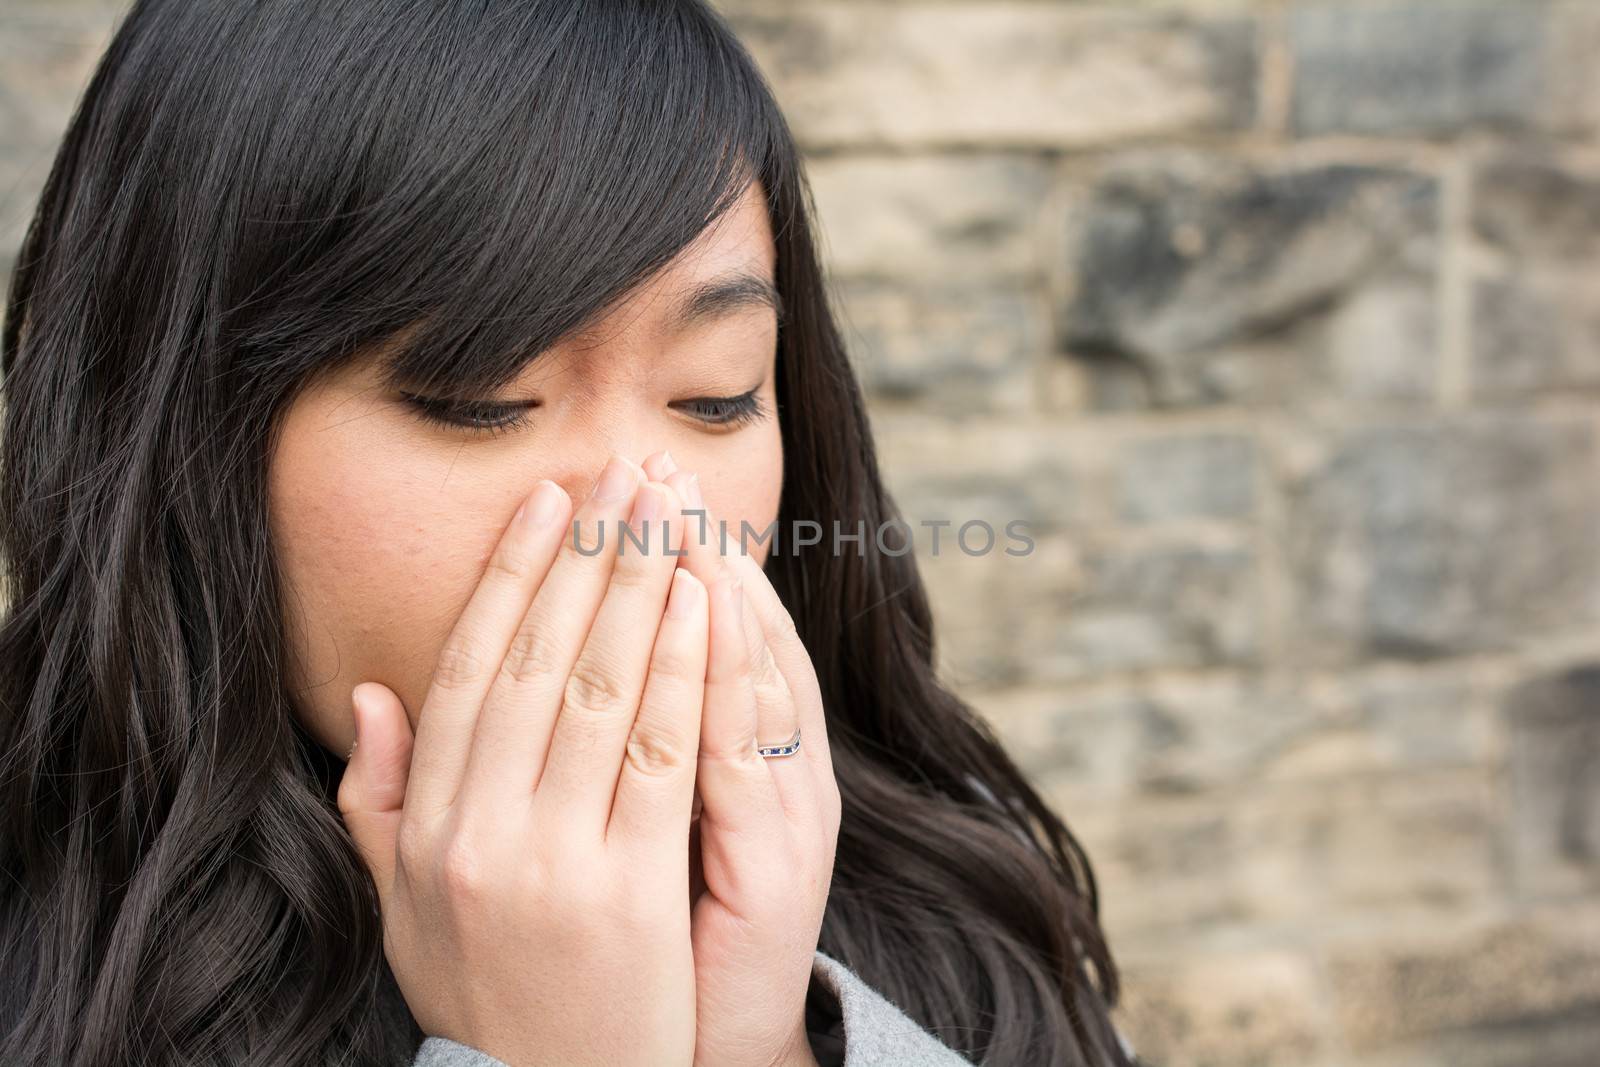 Portrait of young girl in front of a stone wall looking upset and covering mouth